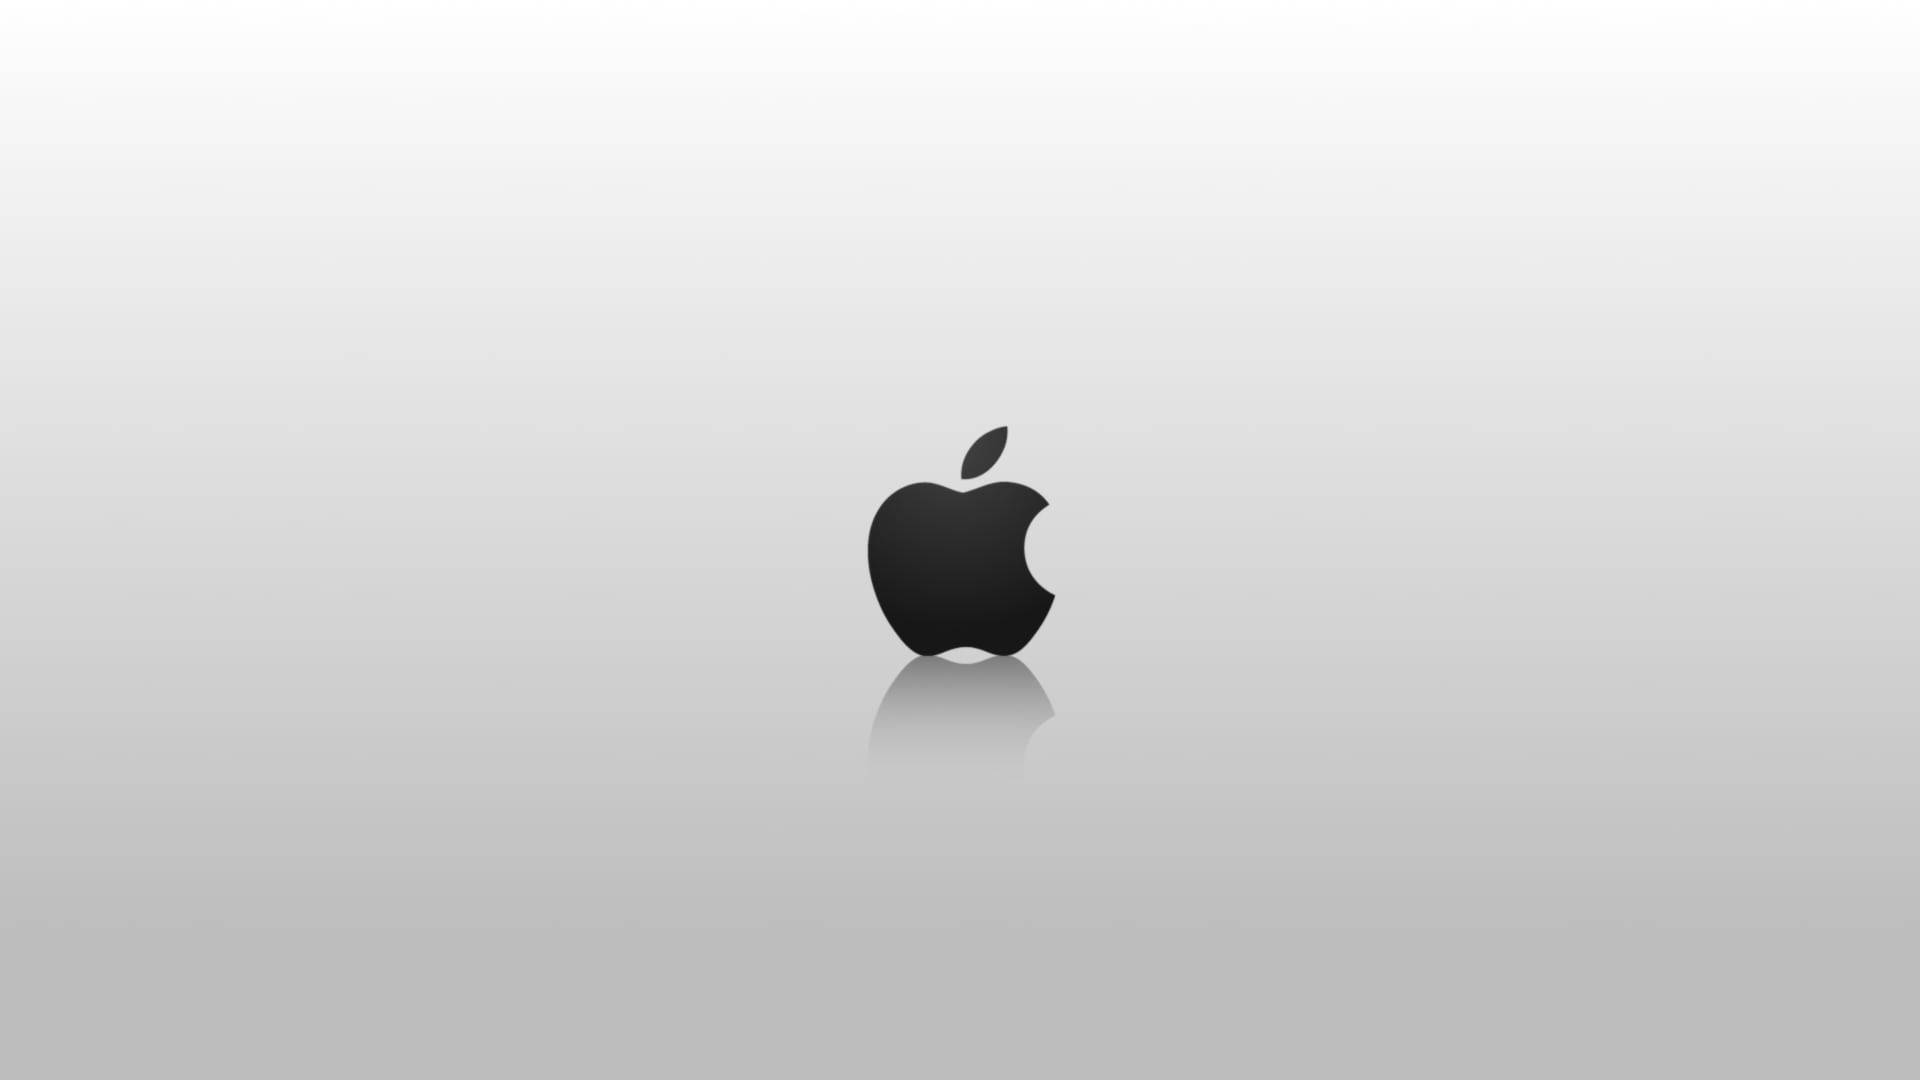 Full Hd Apple On Plain Picture